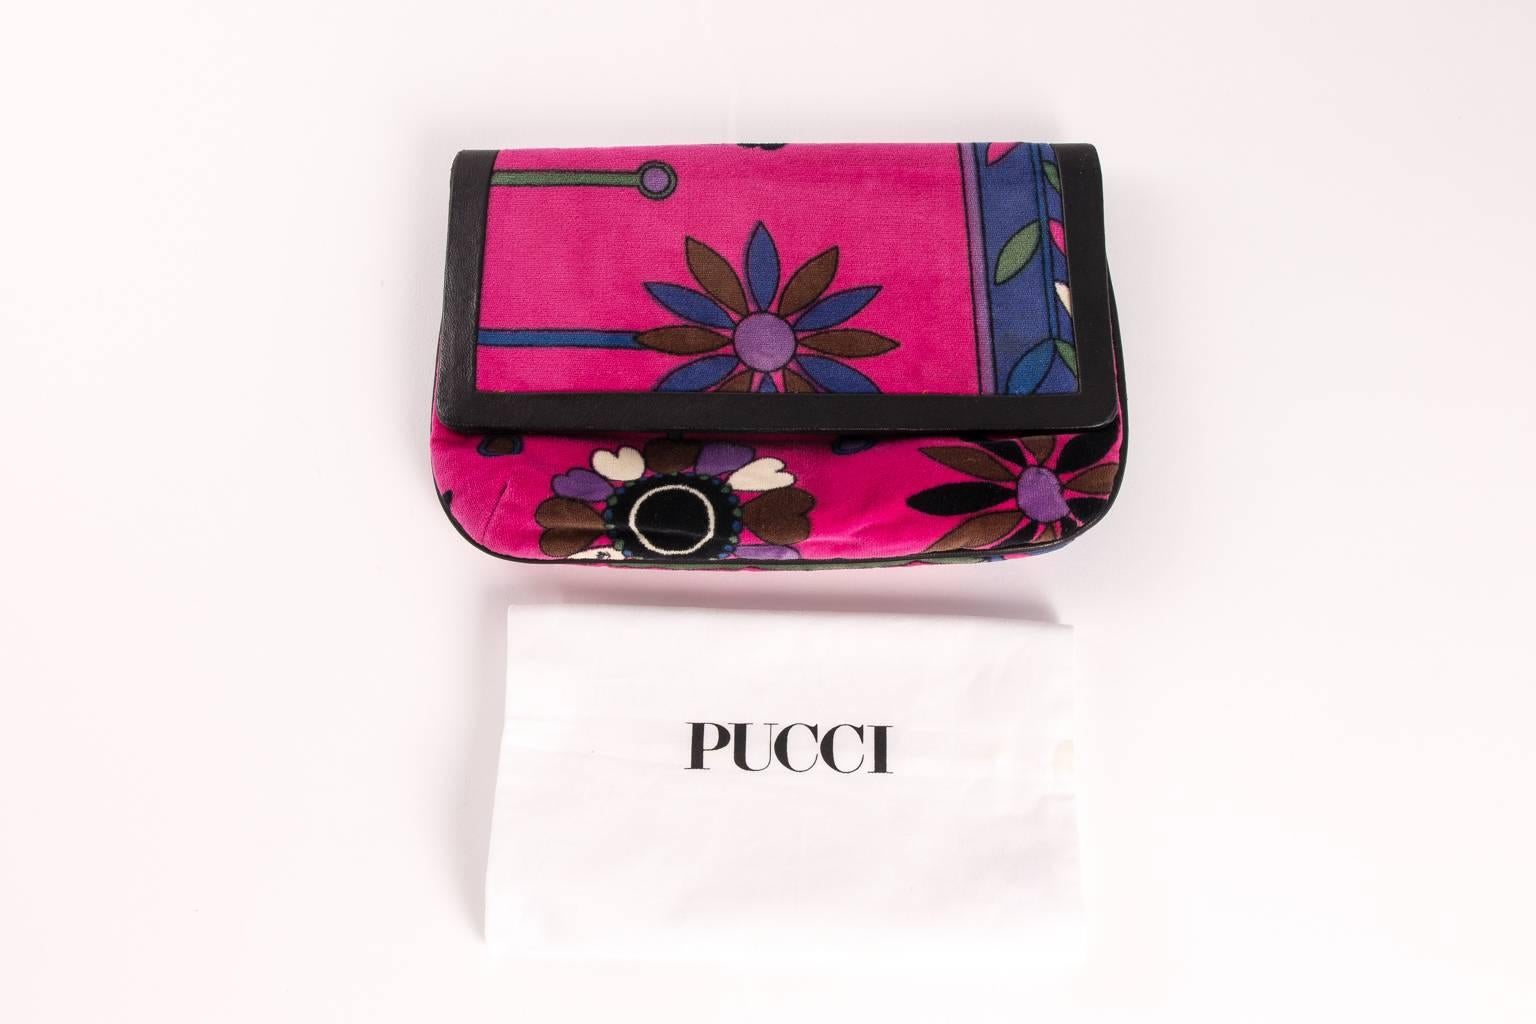 funky finders is pleased to debut this treasure from our renowned vintage Pucci archive. rare circa 60's Pucci velvet clutch featuring a brilliant Mid-Century signed floral motif. black leather trim & piping are notable. fine style from the